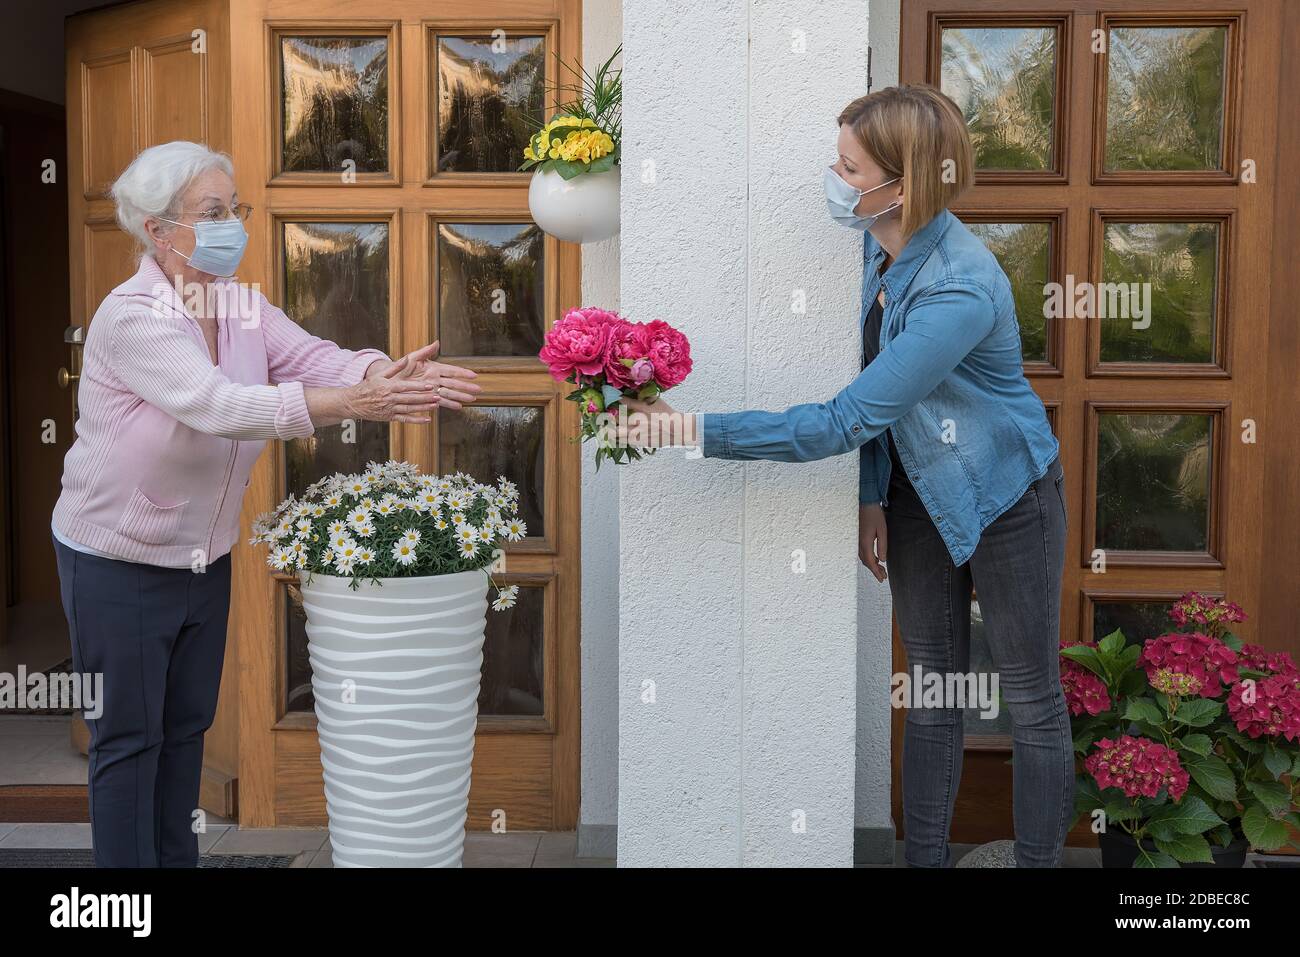 Senior woman with face mask gets flowers from young neighbor woman Stock Photo